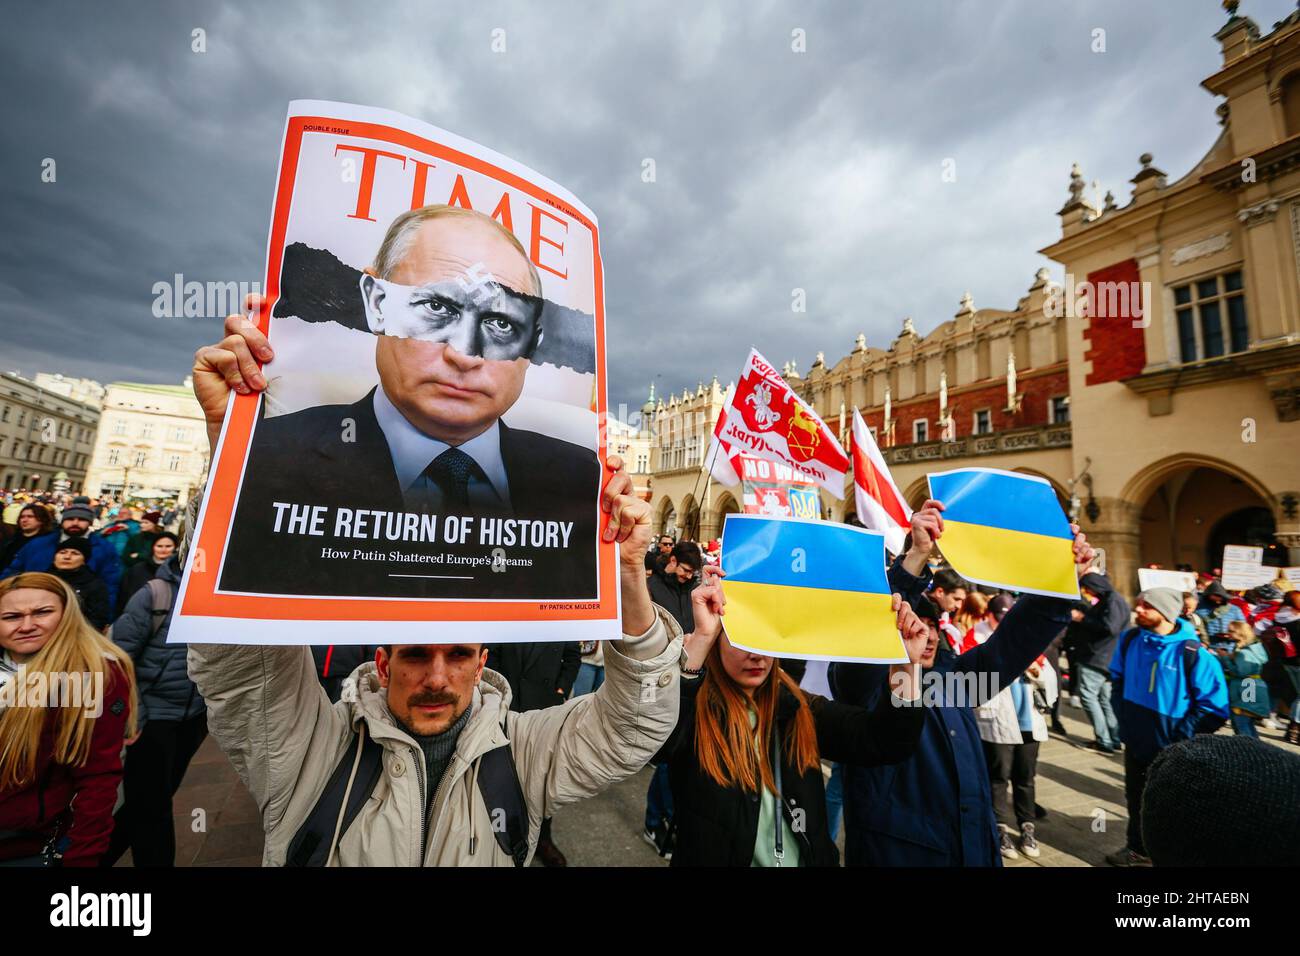 A protester holds a placard with a Time magazine cover showing Russian president Vladimir Putin as Adolf Hitler, along with slogan 'The return of history' during the demonstration. An anti-war protest by the Ukrainian community, the Poles and Belarusians who support them. Since the beginning of the Russian invasion of Ukraine, demonstrations have taken place daily and lasted many hours. Participants are constantly trying to reach as many people as possible with their message, including employees of the US and German consulates, in front of which they also stop several times a day. (Photo by Fi Stock Photo